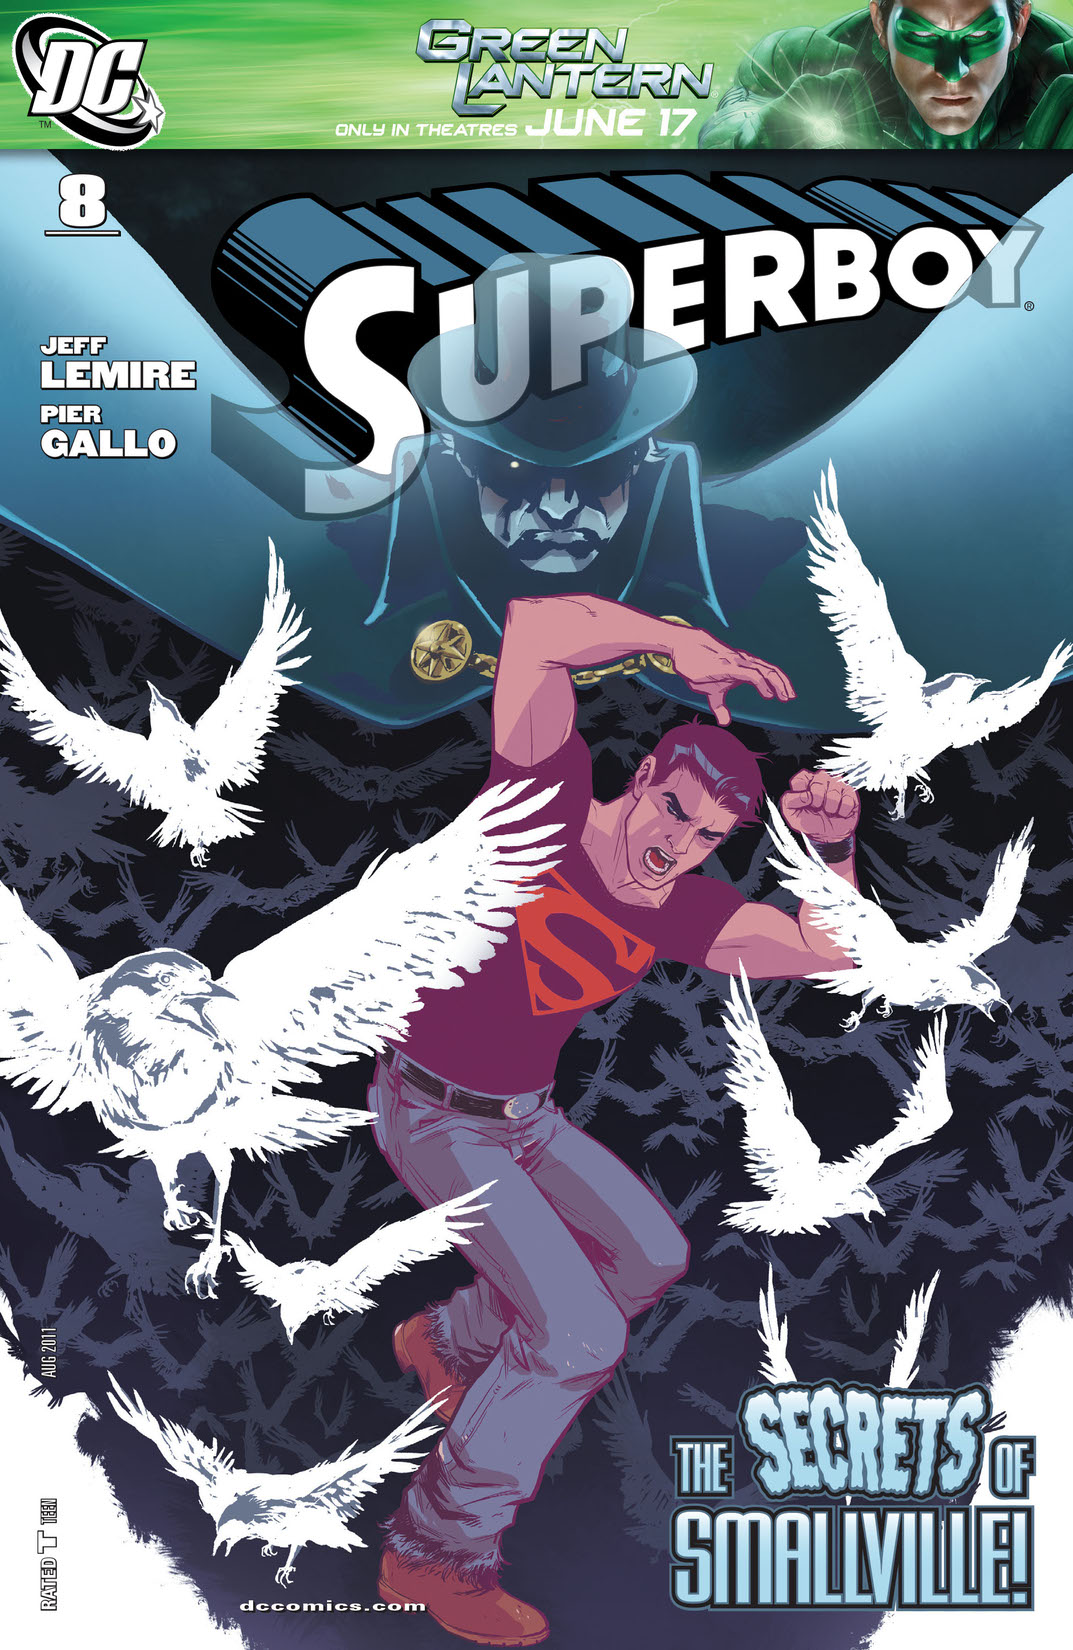 Superboy (2010-) #8 preview images